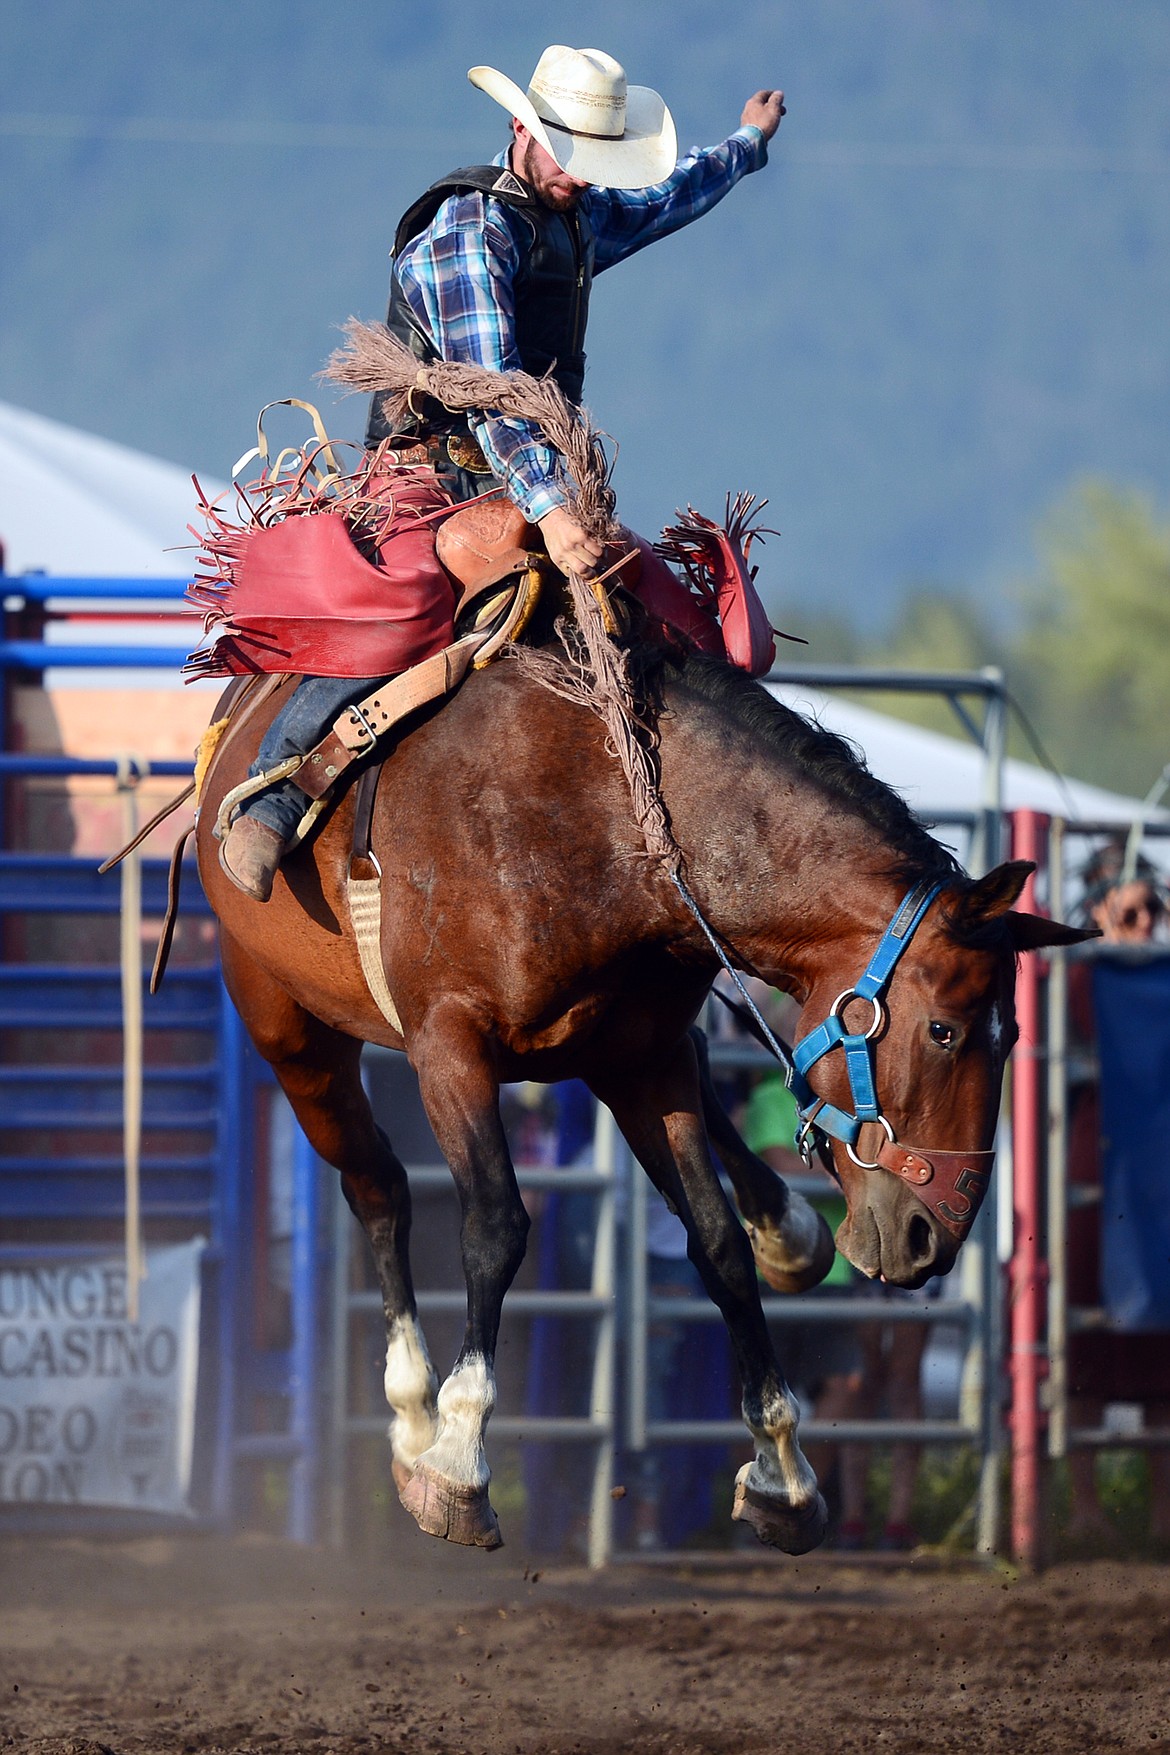 Cody Ray Miller, of Dillon, competes in the Saddle Bronc Riding event at the Bigfork Rodeo on Friday. (Casey Kreider/Daily Inter Lake)